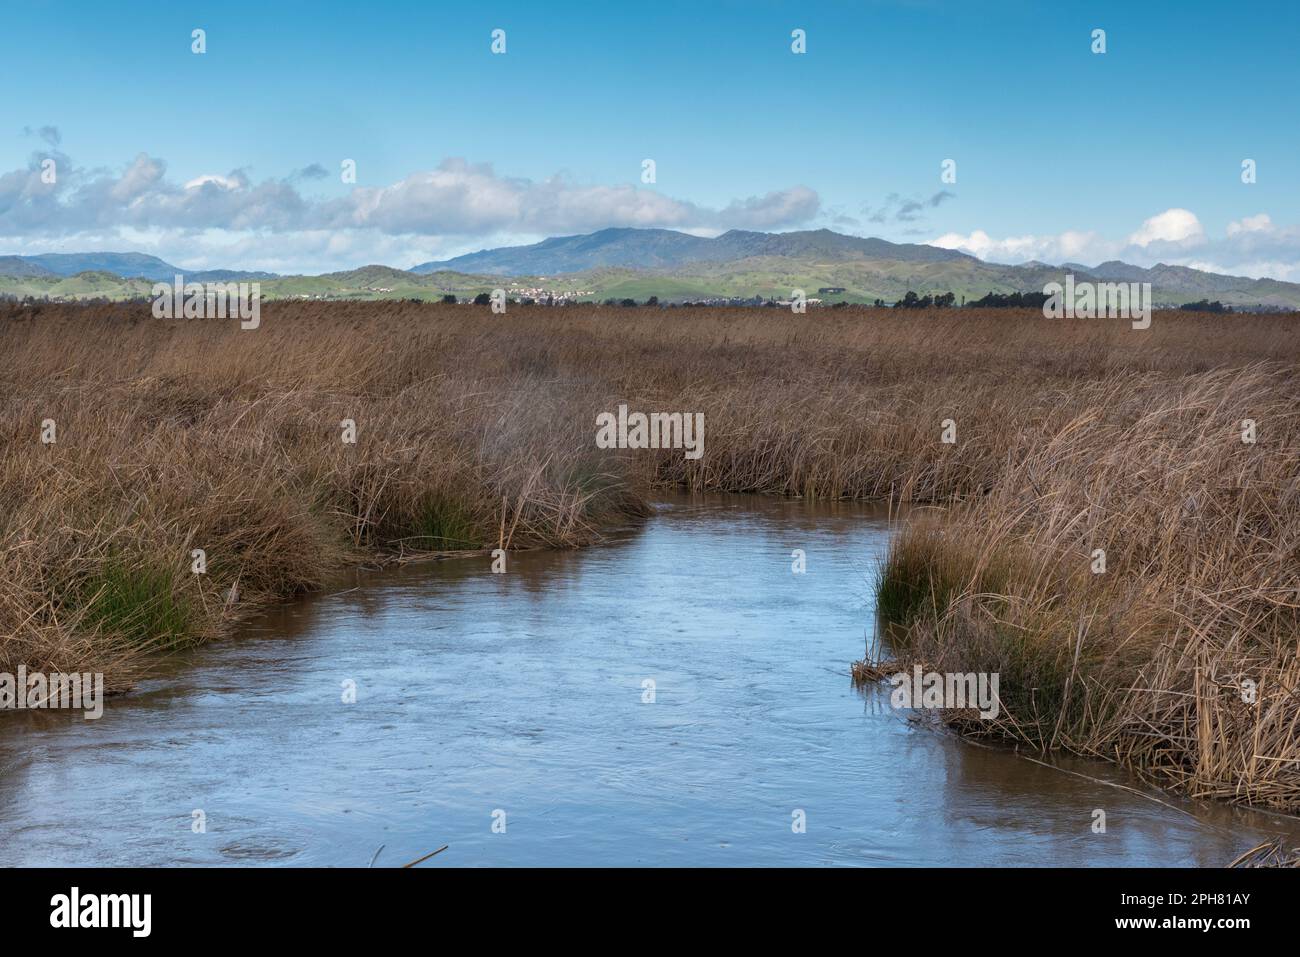 Blackish Marsh slough along Grizzly island  road area on a  blue sky aday nd plenty of sky copy-space Fairfield, California, USA, the mountains in the Stock Photo